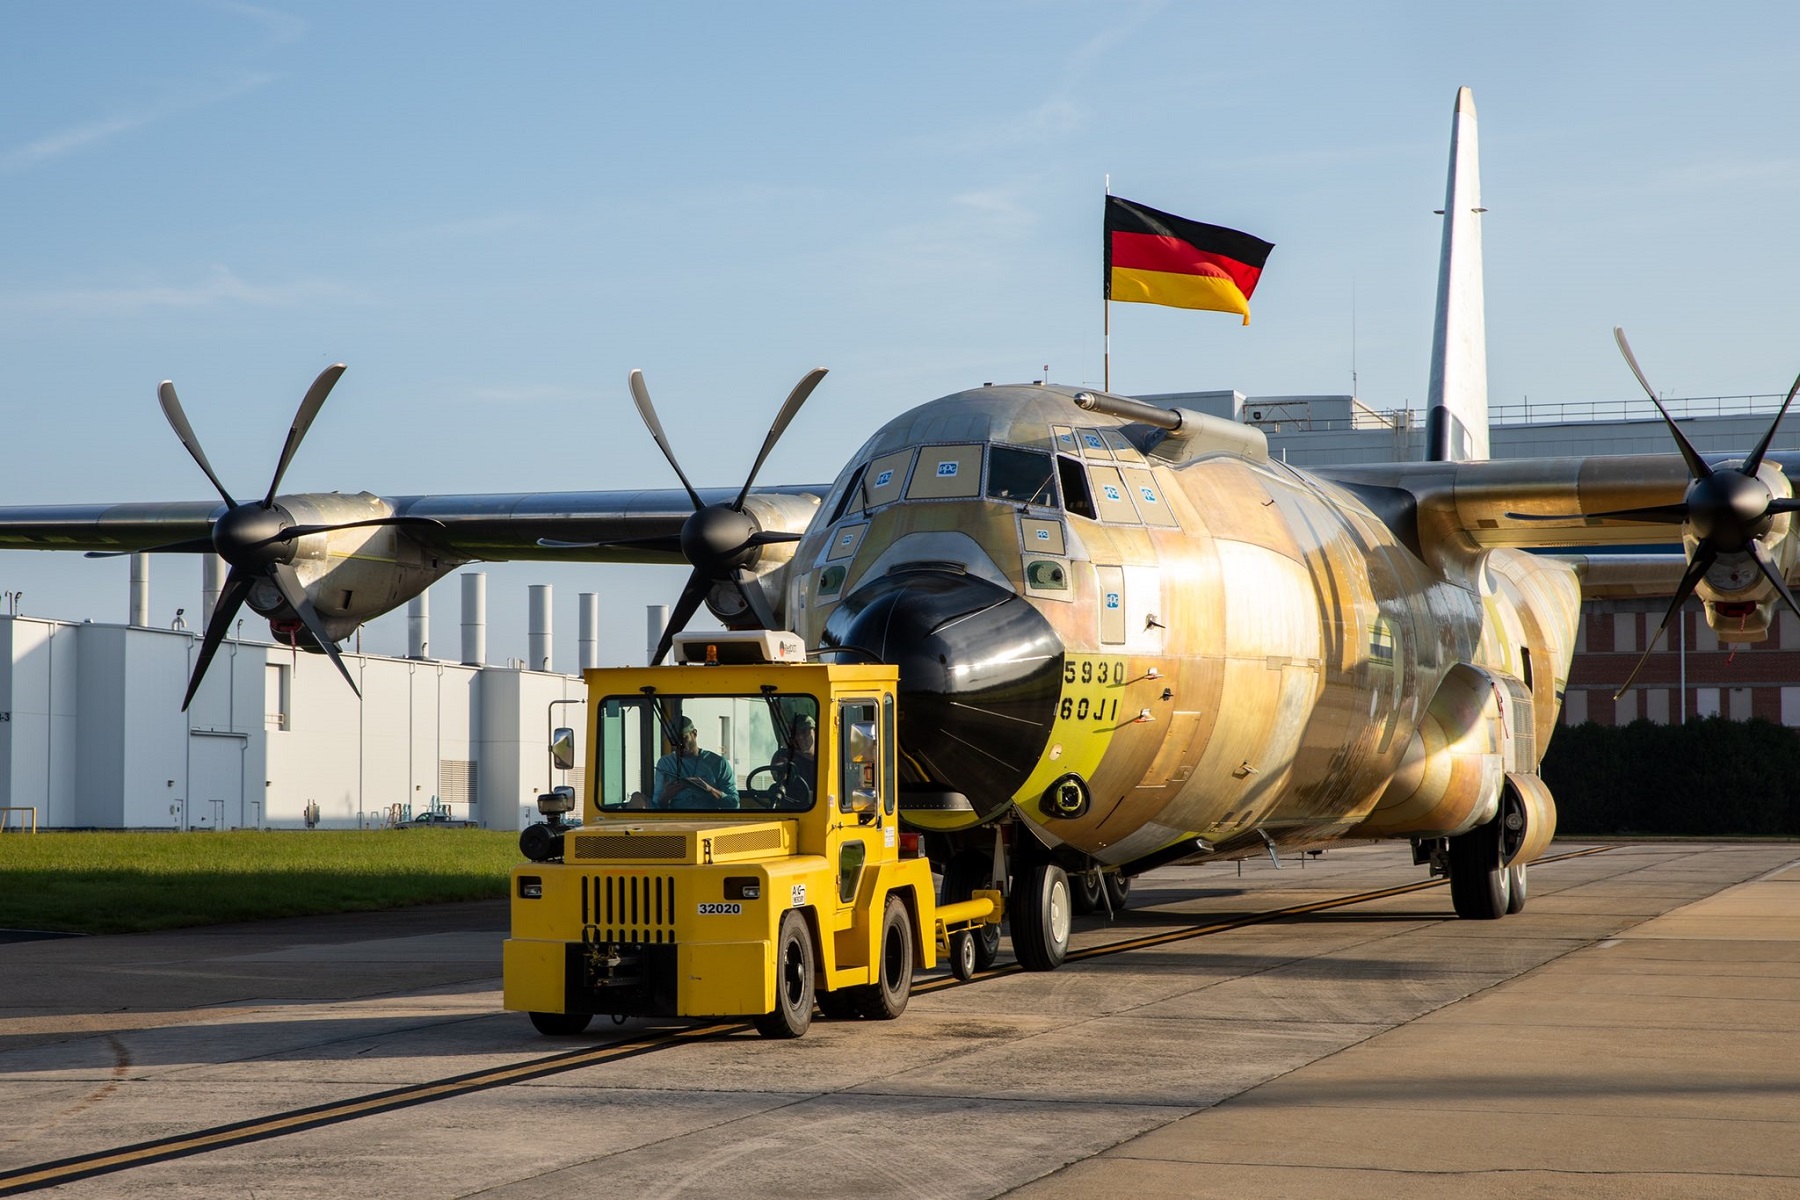 Lockheed Martin Rollout of the German Air Force C-130J Super Hercules Military Transport